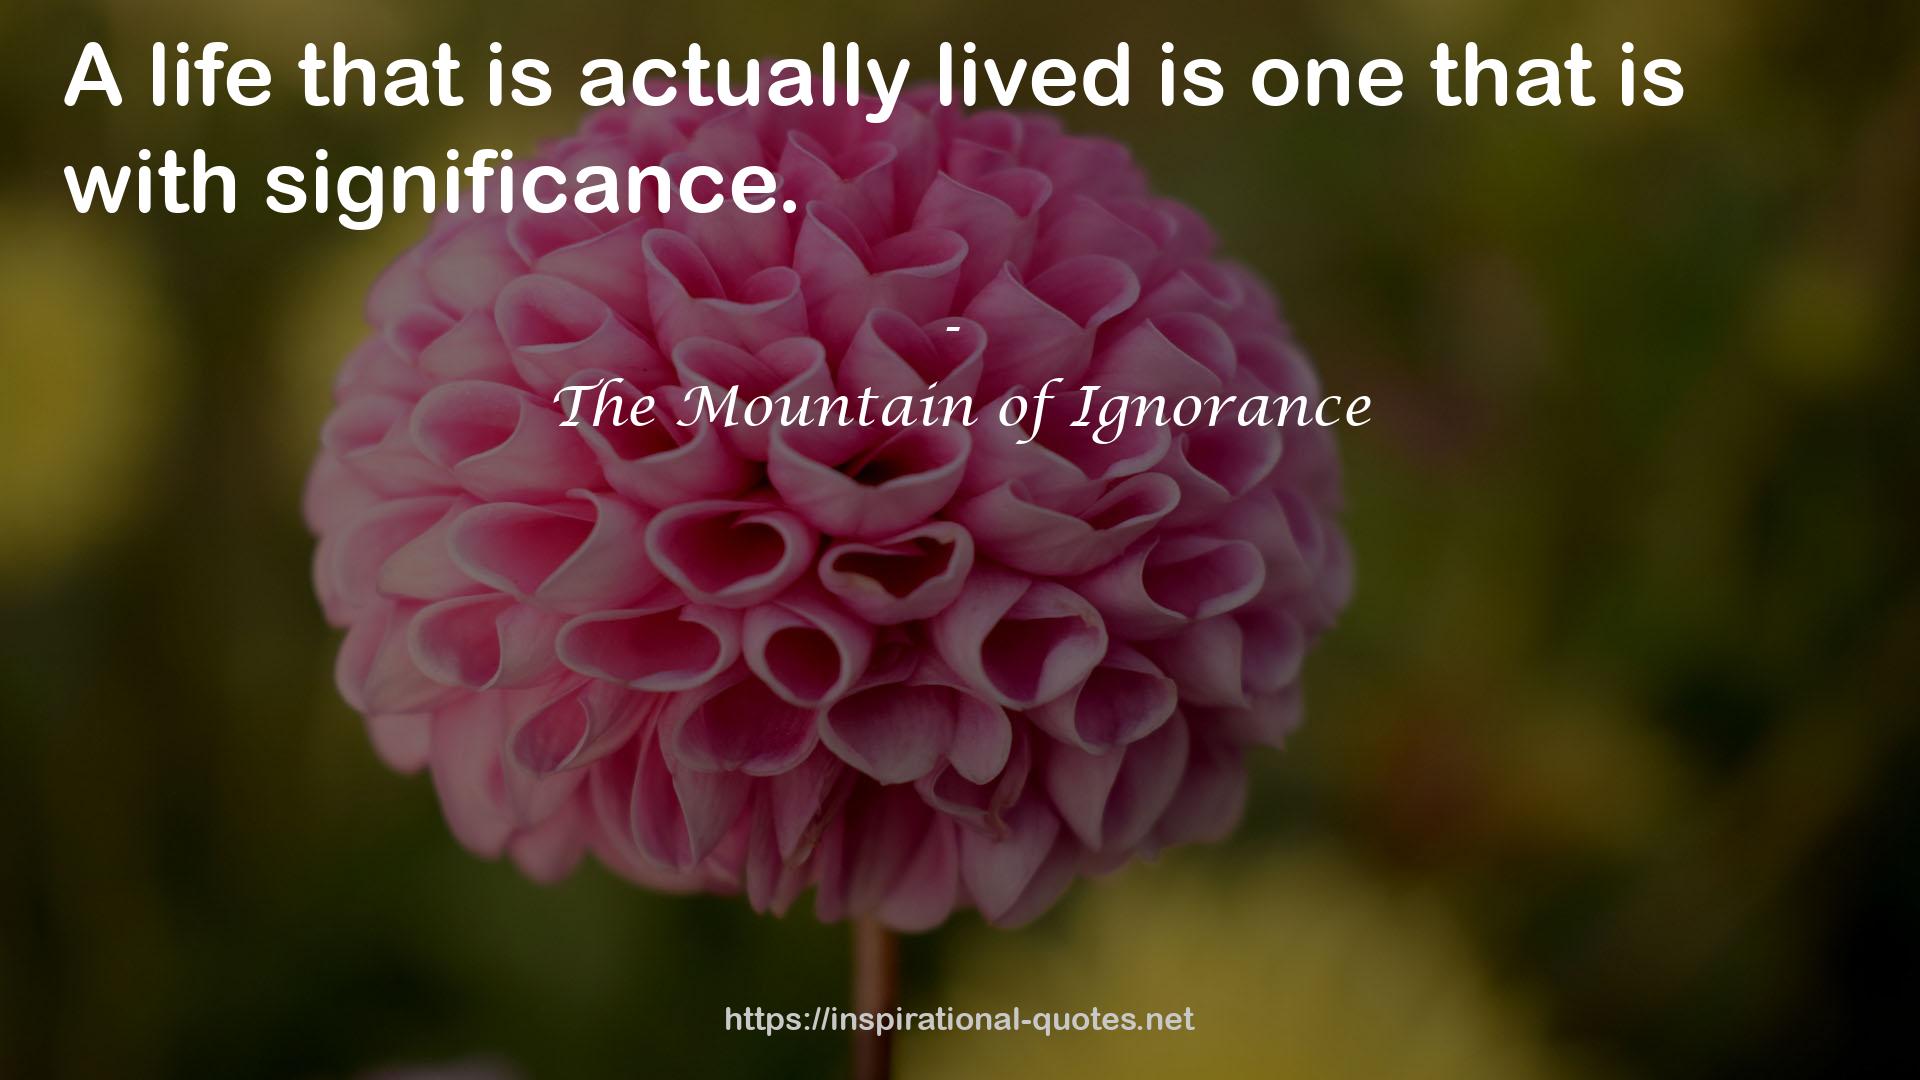 The Mountain of Ignorance QUOTES